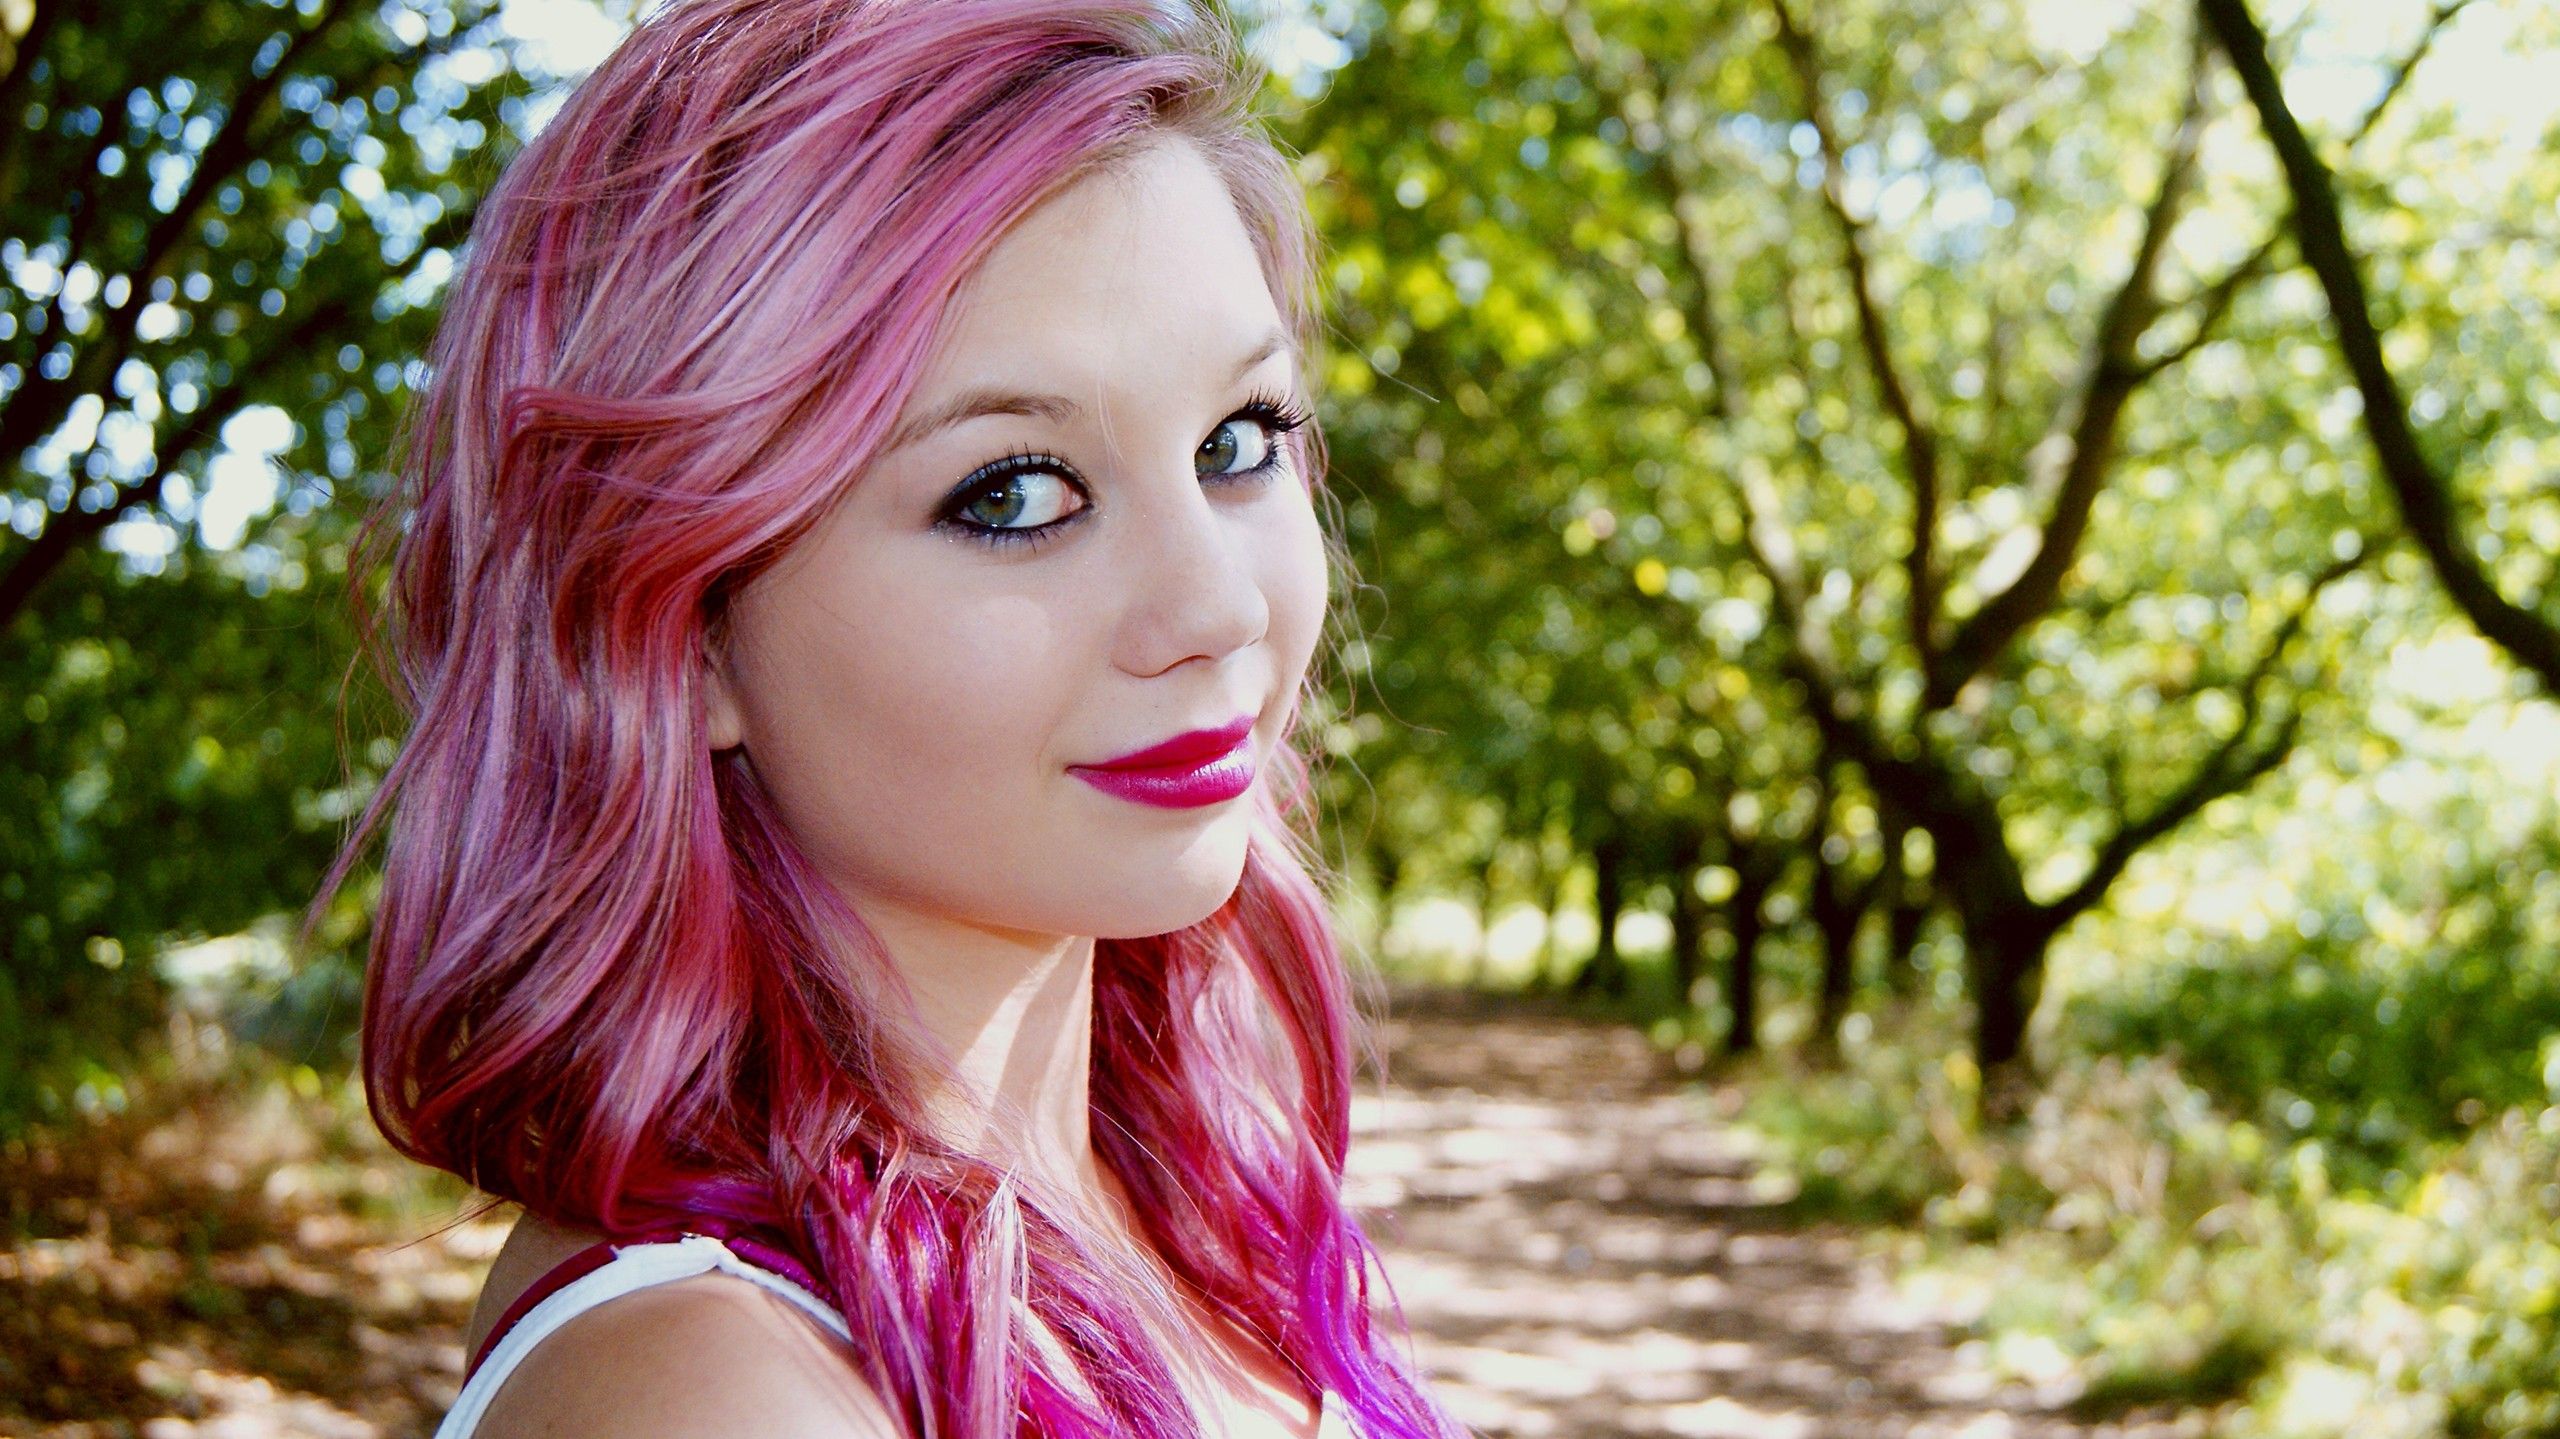 Pretty in Pink faces nature pink hair women wallpapers Desktop wallpapers 640x480